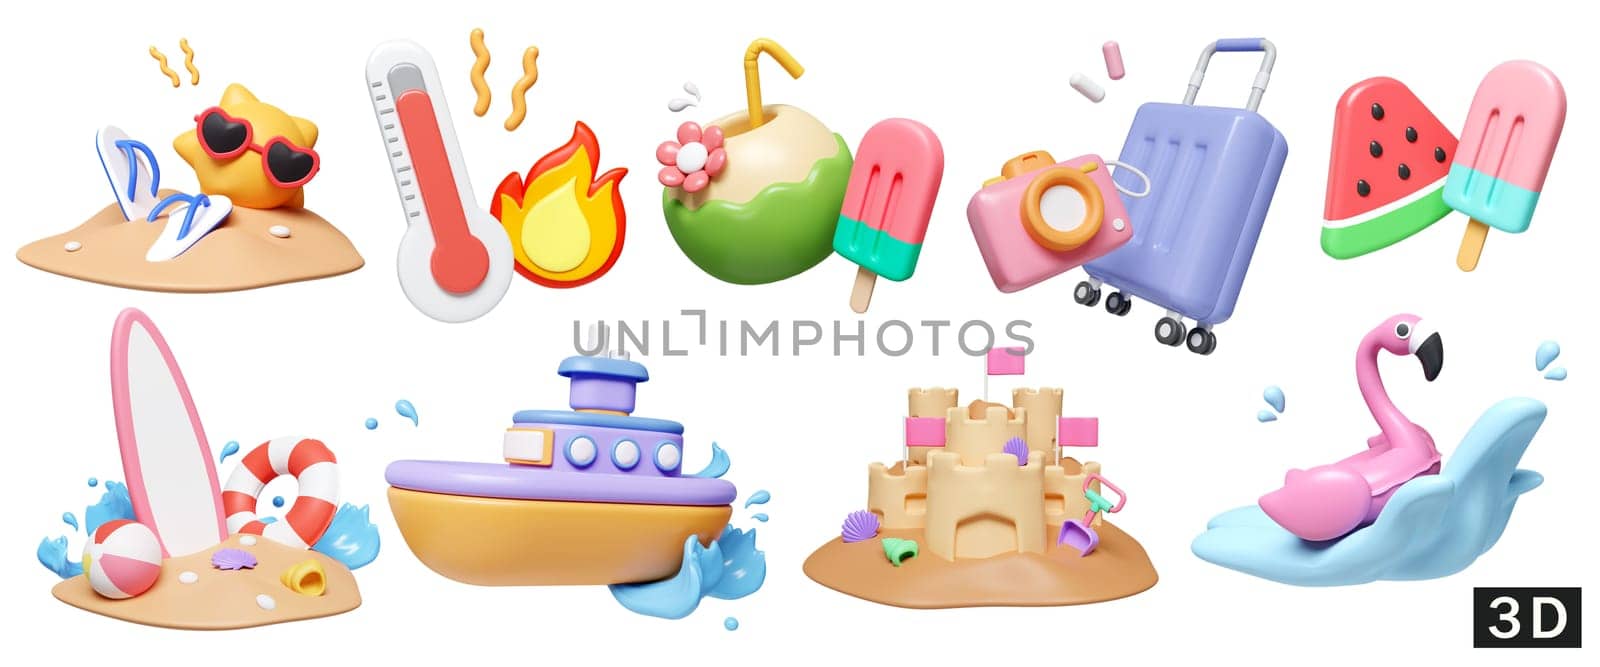 3d render illustration. a large collection of icons on the theme of summer for outdoor trip vacation isolated in white background design. by meepiangraphic